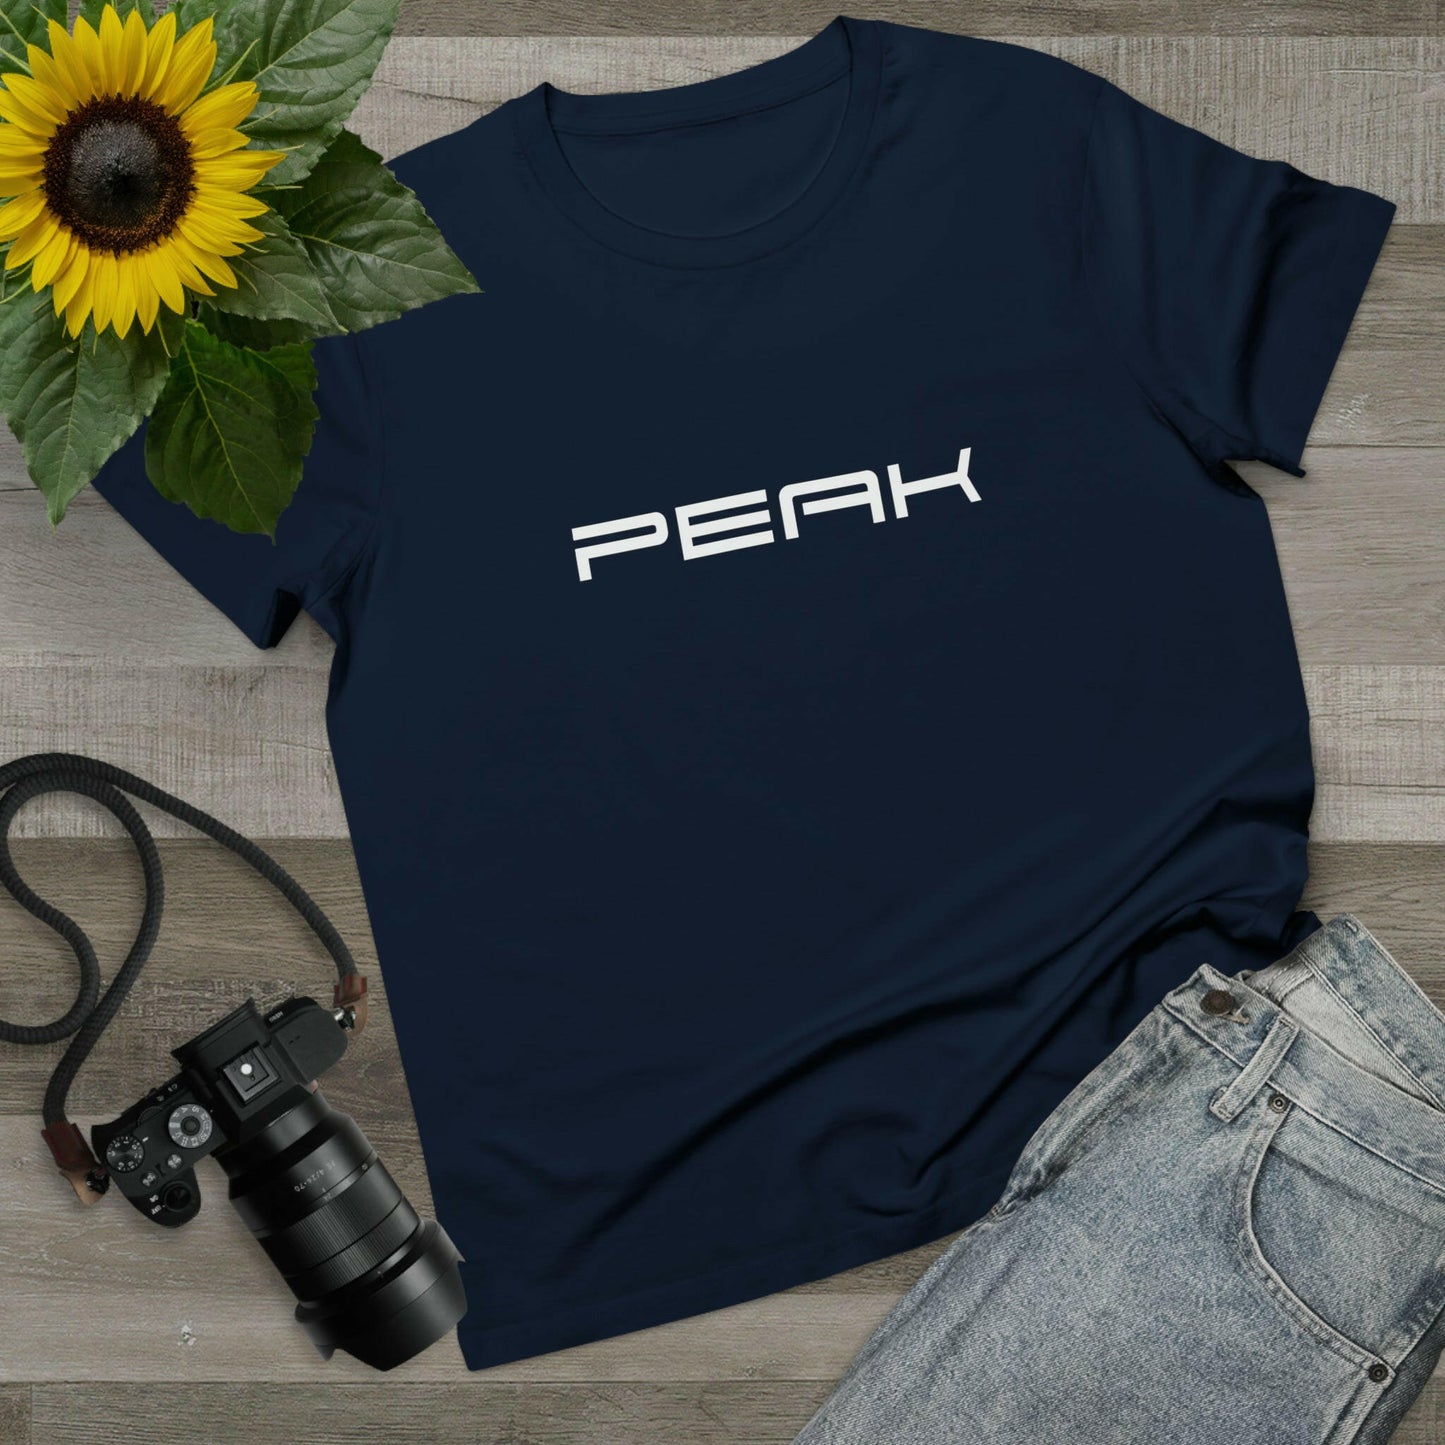 PEAK Women’s Maple Tee (Available in 5 Colors)